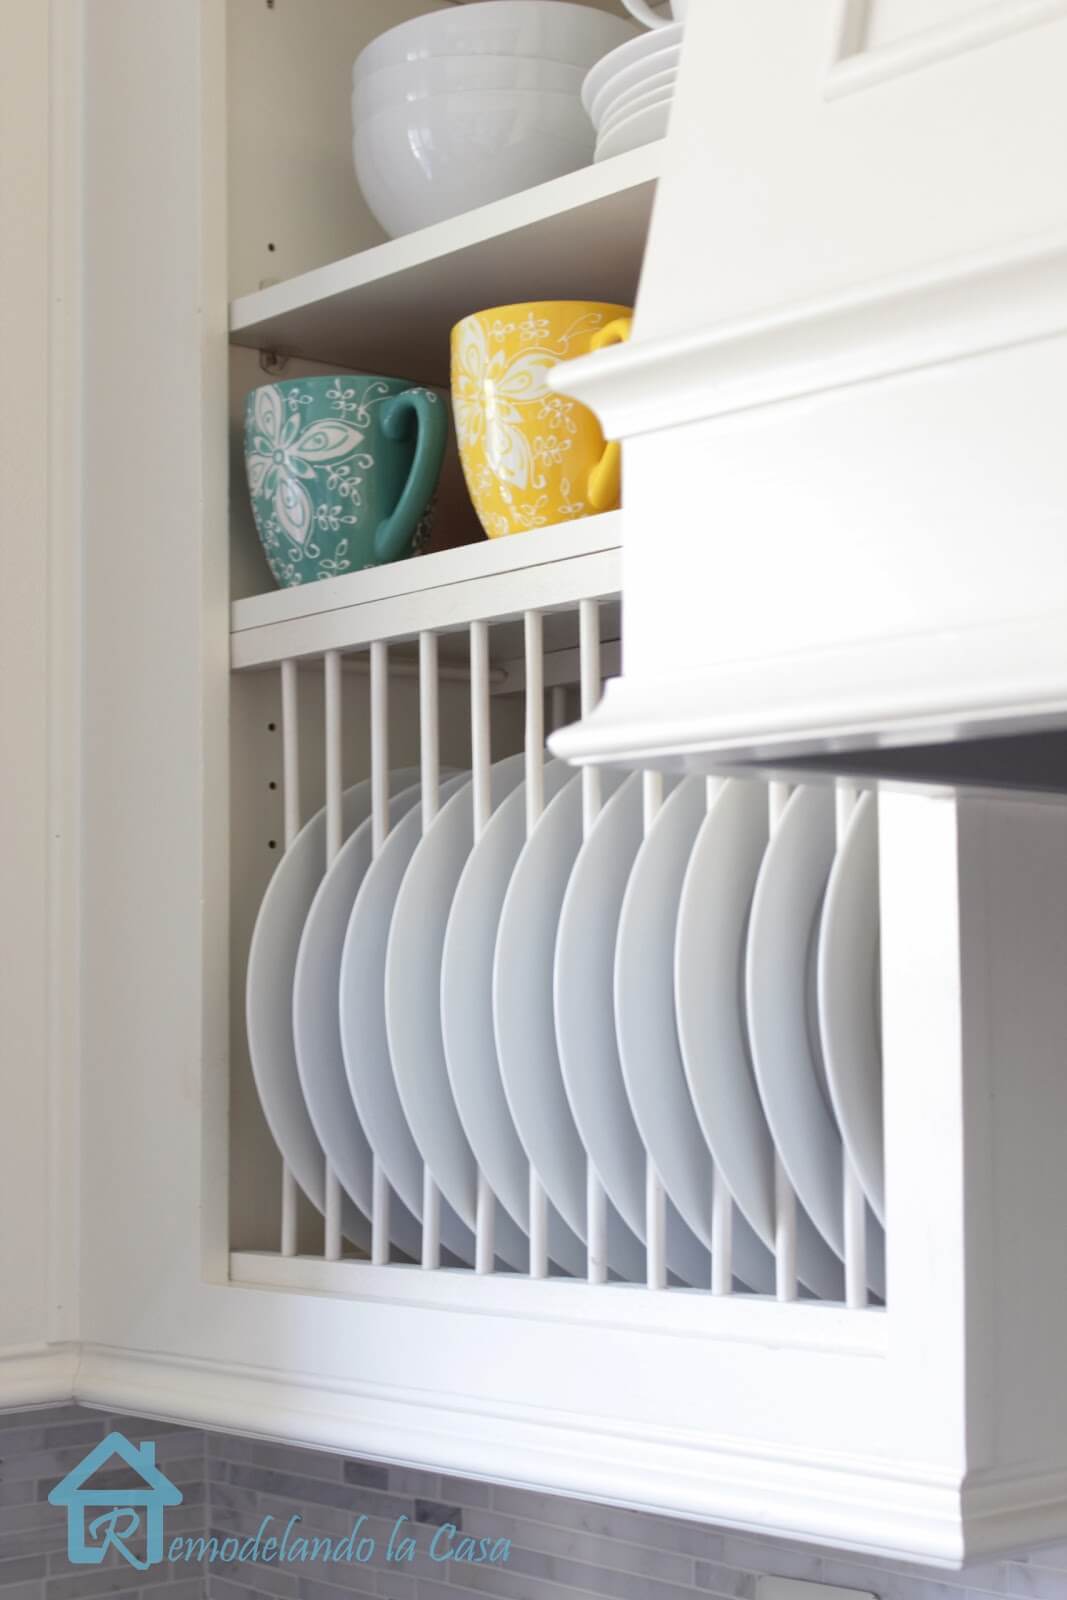 Save Space with a DIY Plate Rack